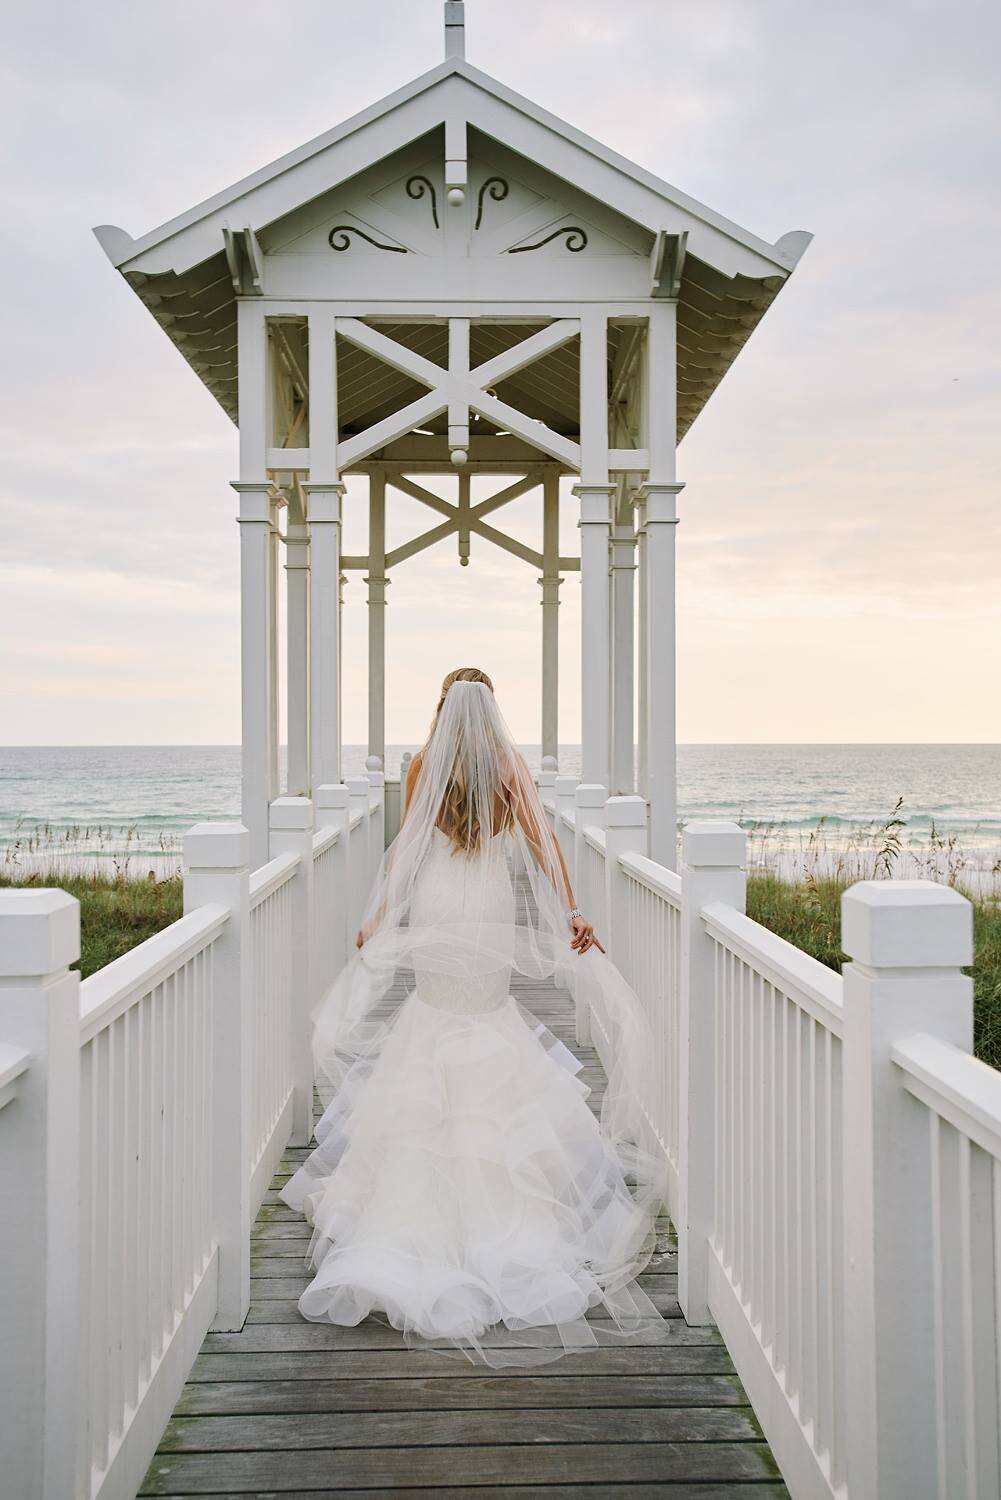 A bride takes her portrait at dusk on a walkover at carillon beach